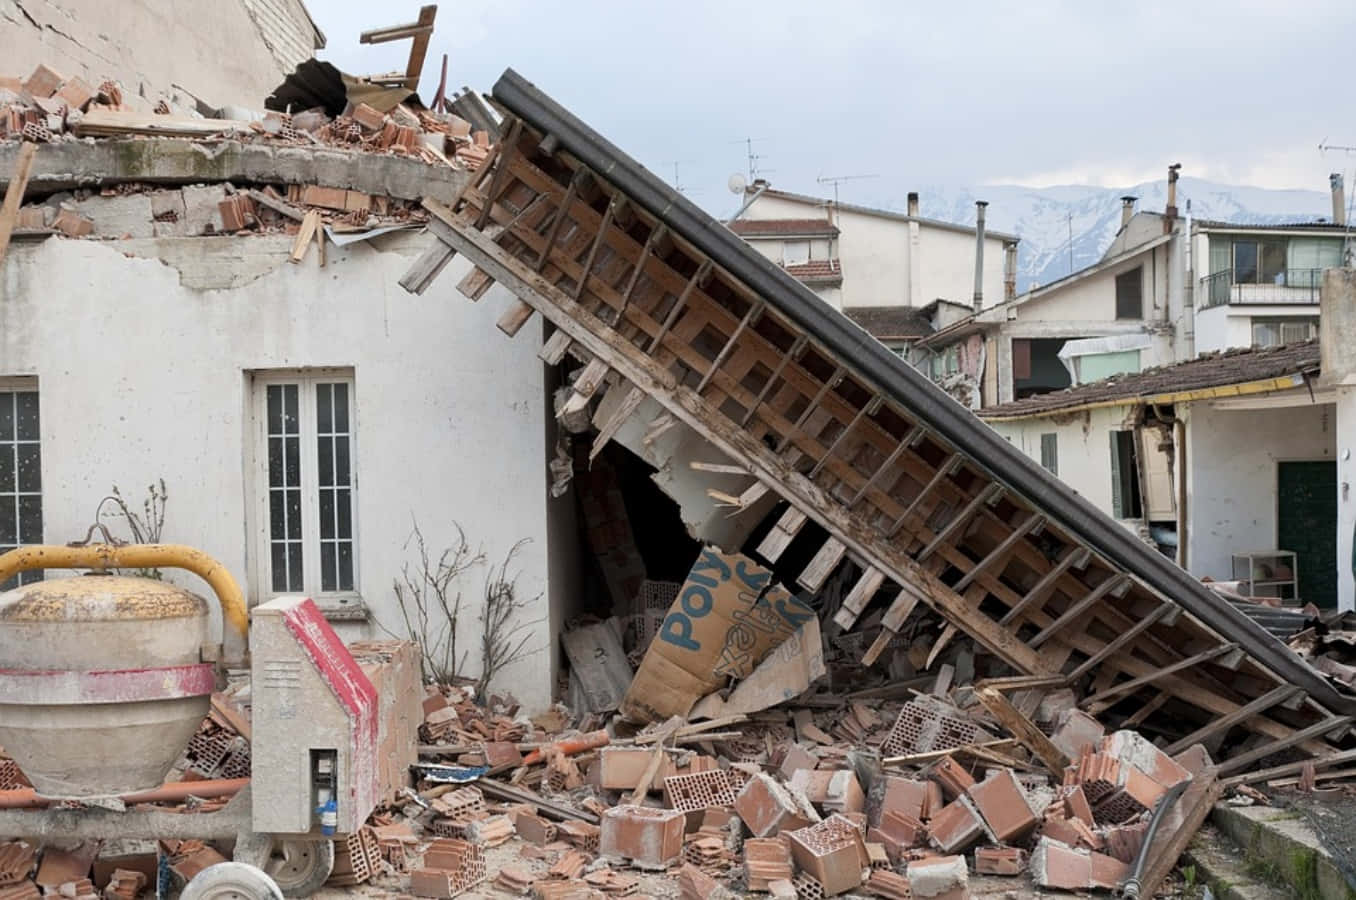 Earthquakes are natural disasters that can cause great destruction